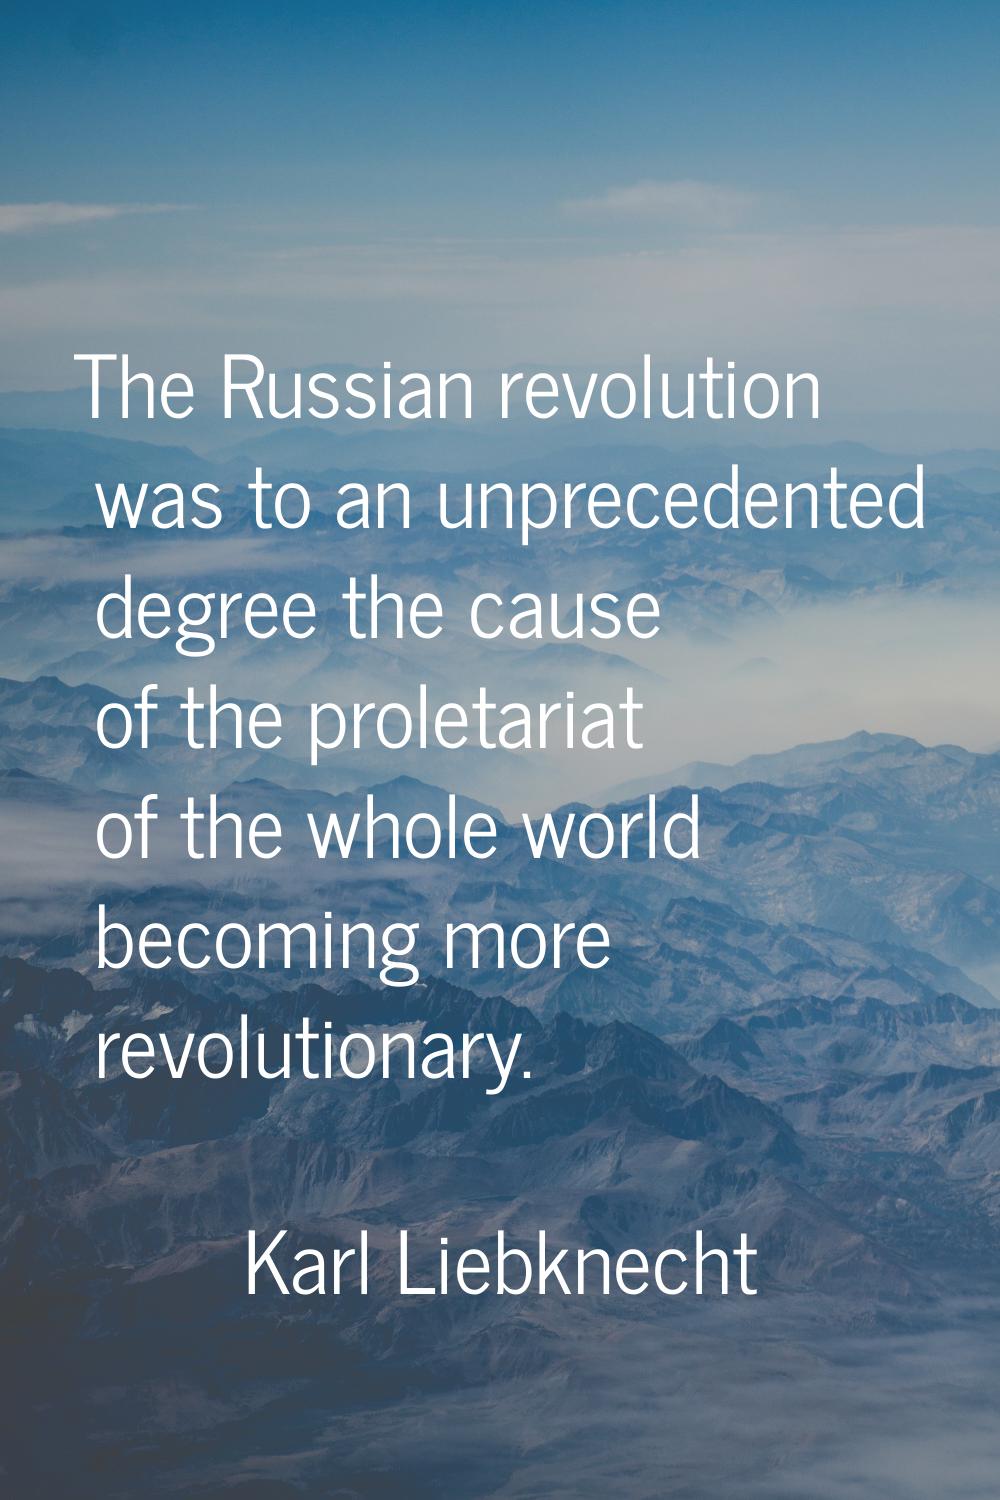 The Russian revolution was to an unprecedented degree the cause of the proletariat of the whole wor